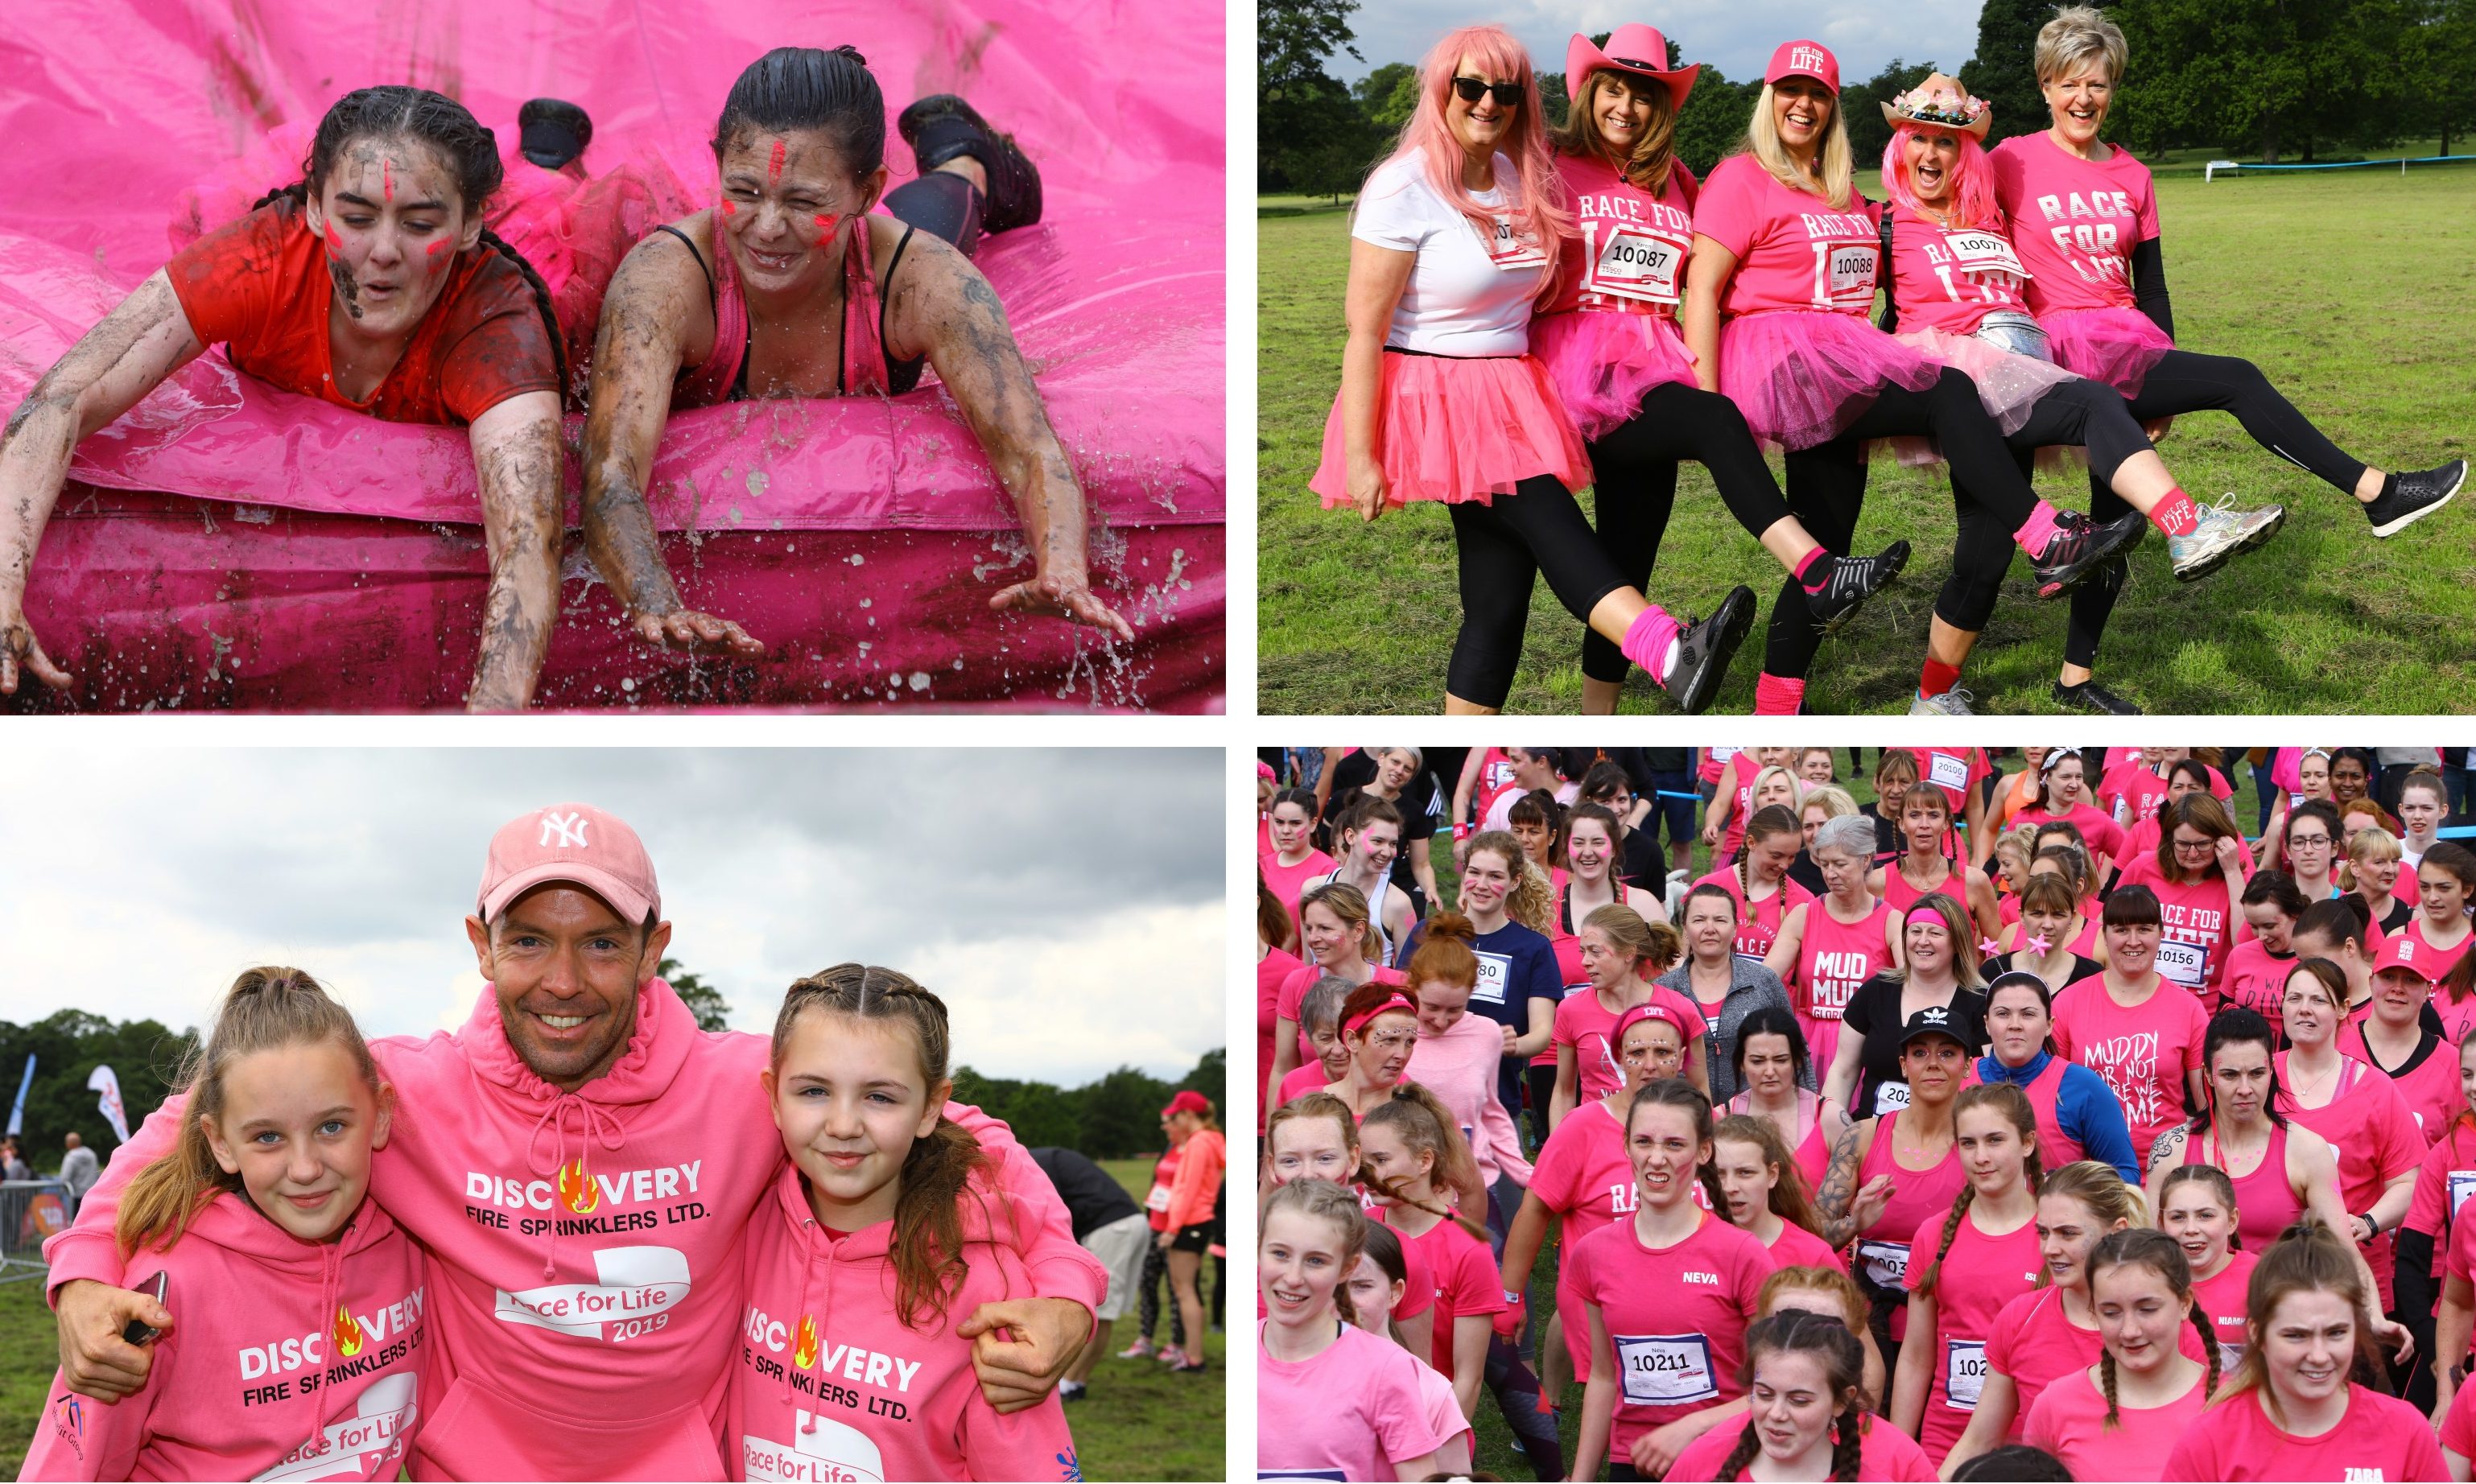 A previous Dundee Race for Life.